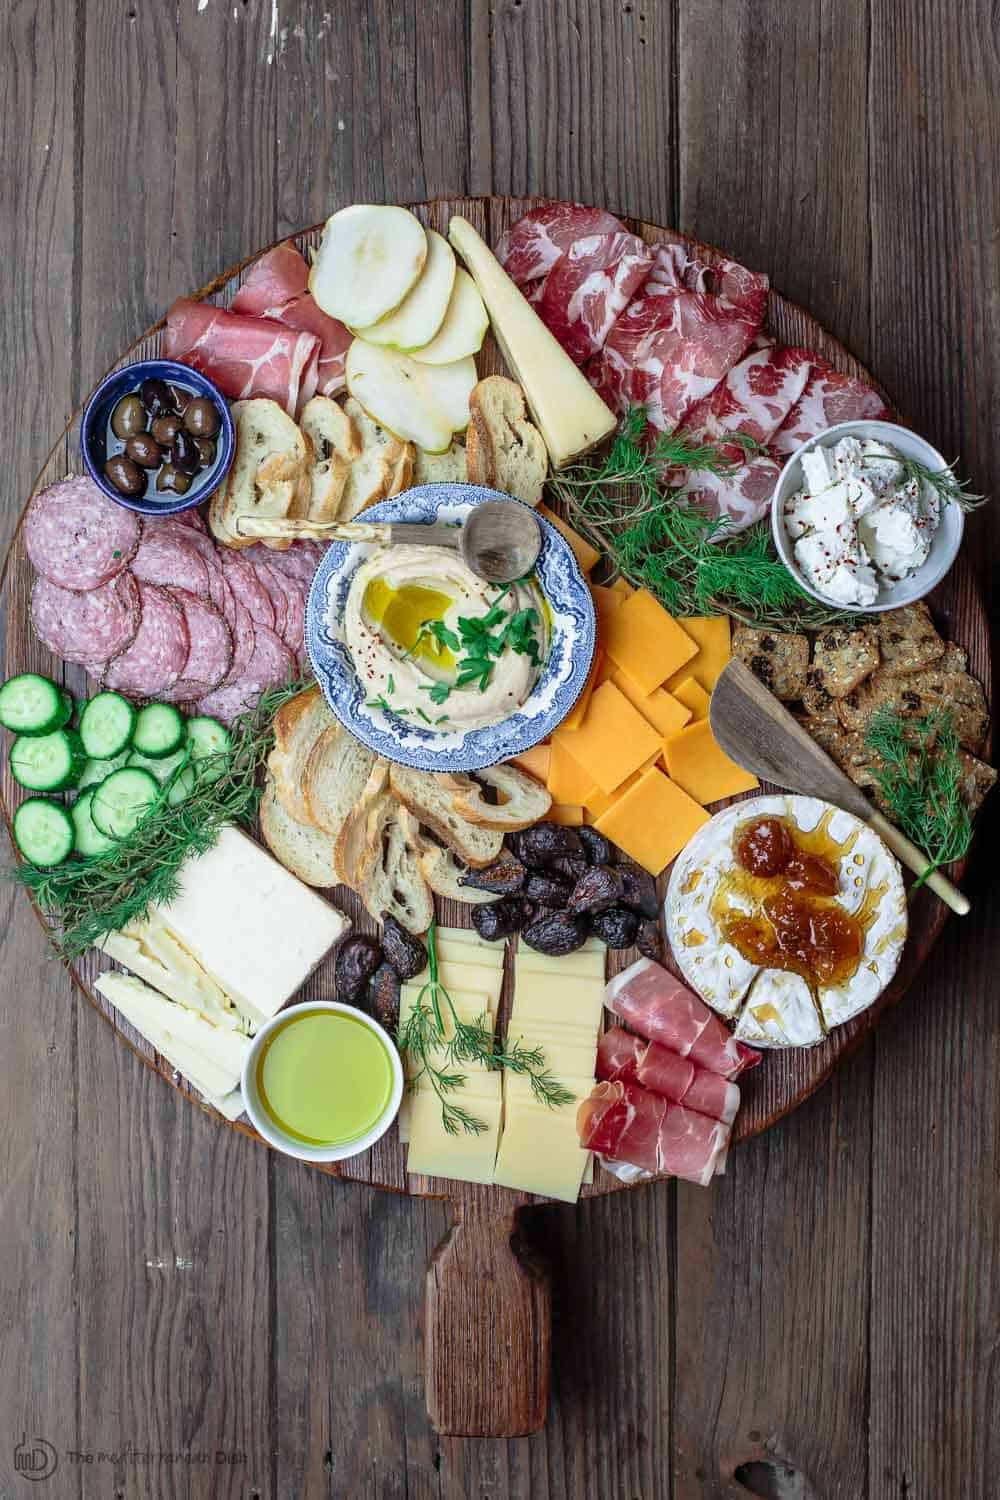 How to Make an Awesome Cheese Board in Minutes